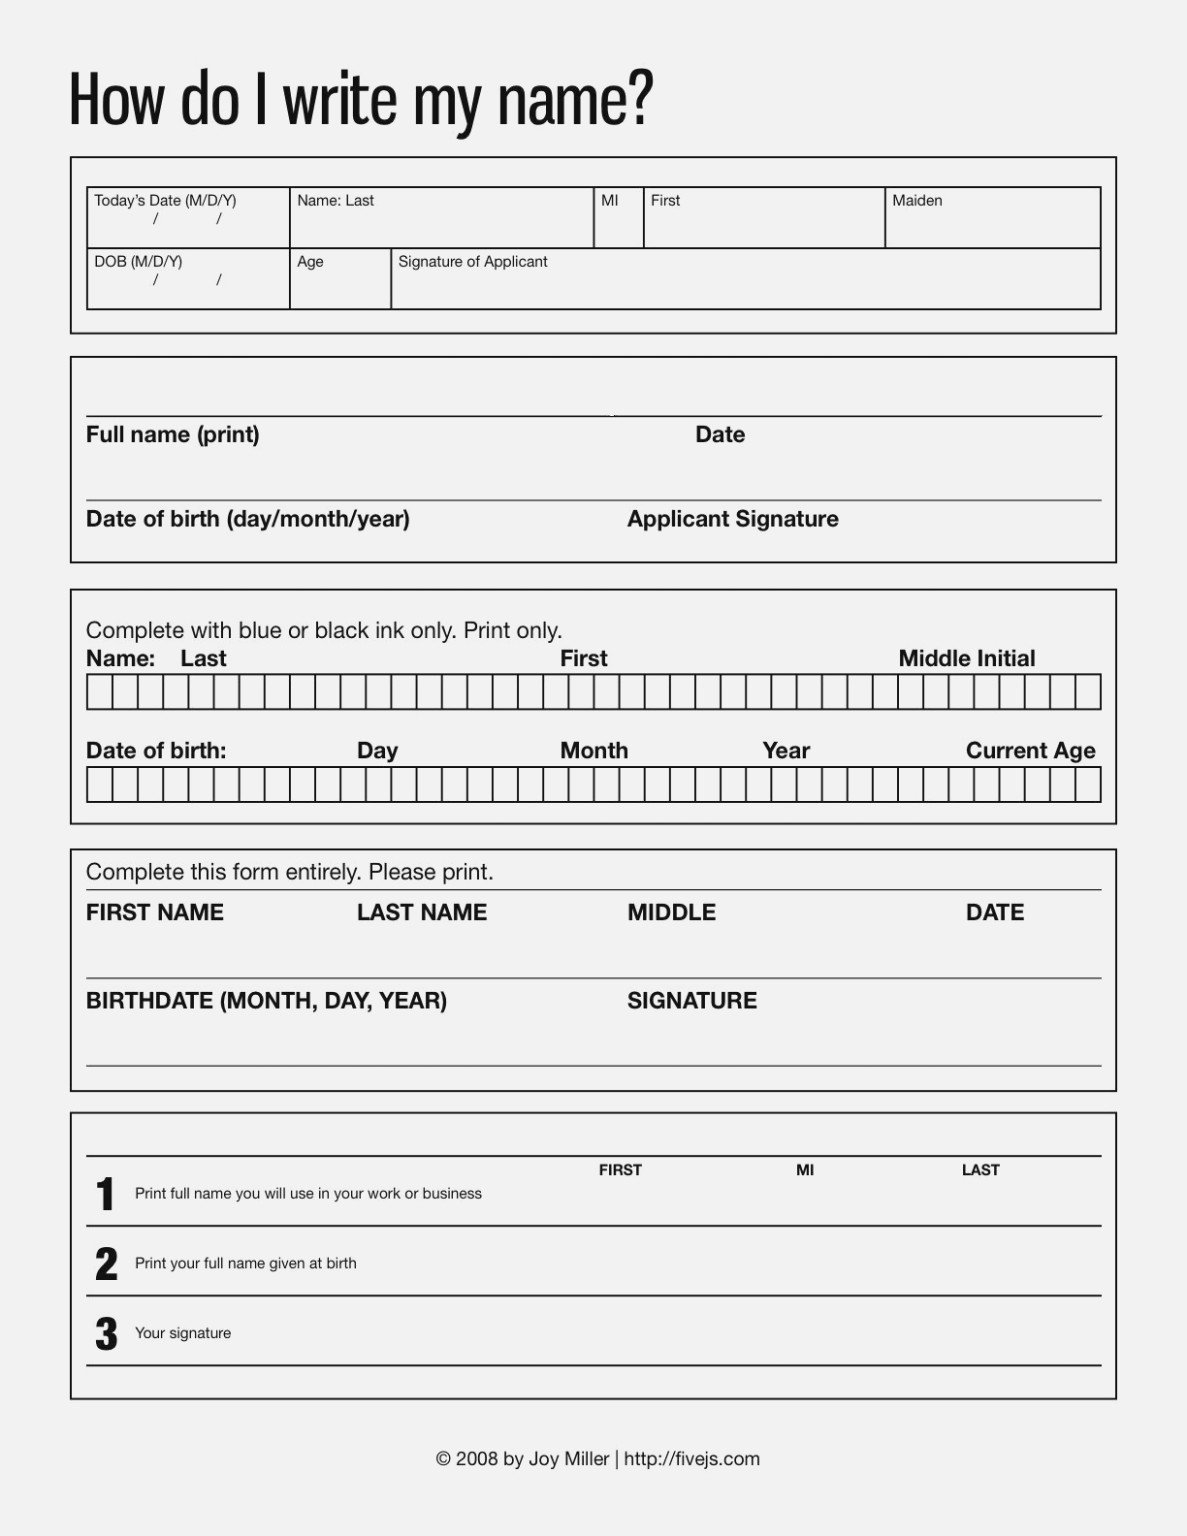 Teaching Children How To Fill Out Forms  Sites For All Tutors Pertaining To Filling Out Forms Worksheets Pdf